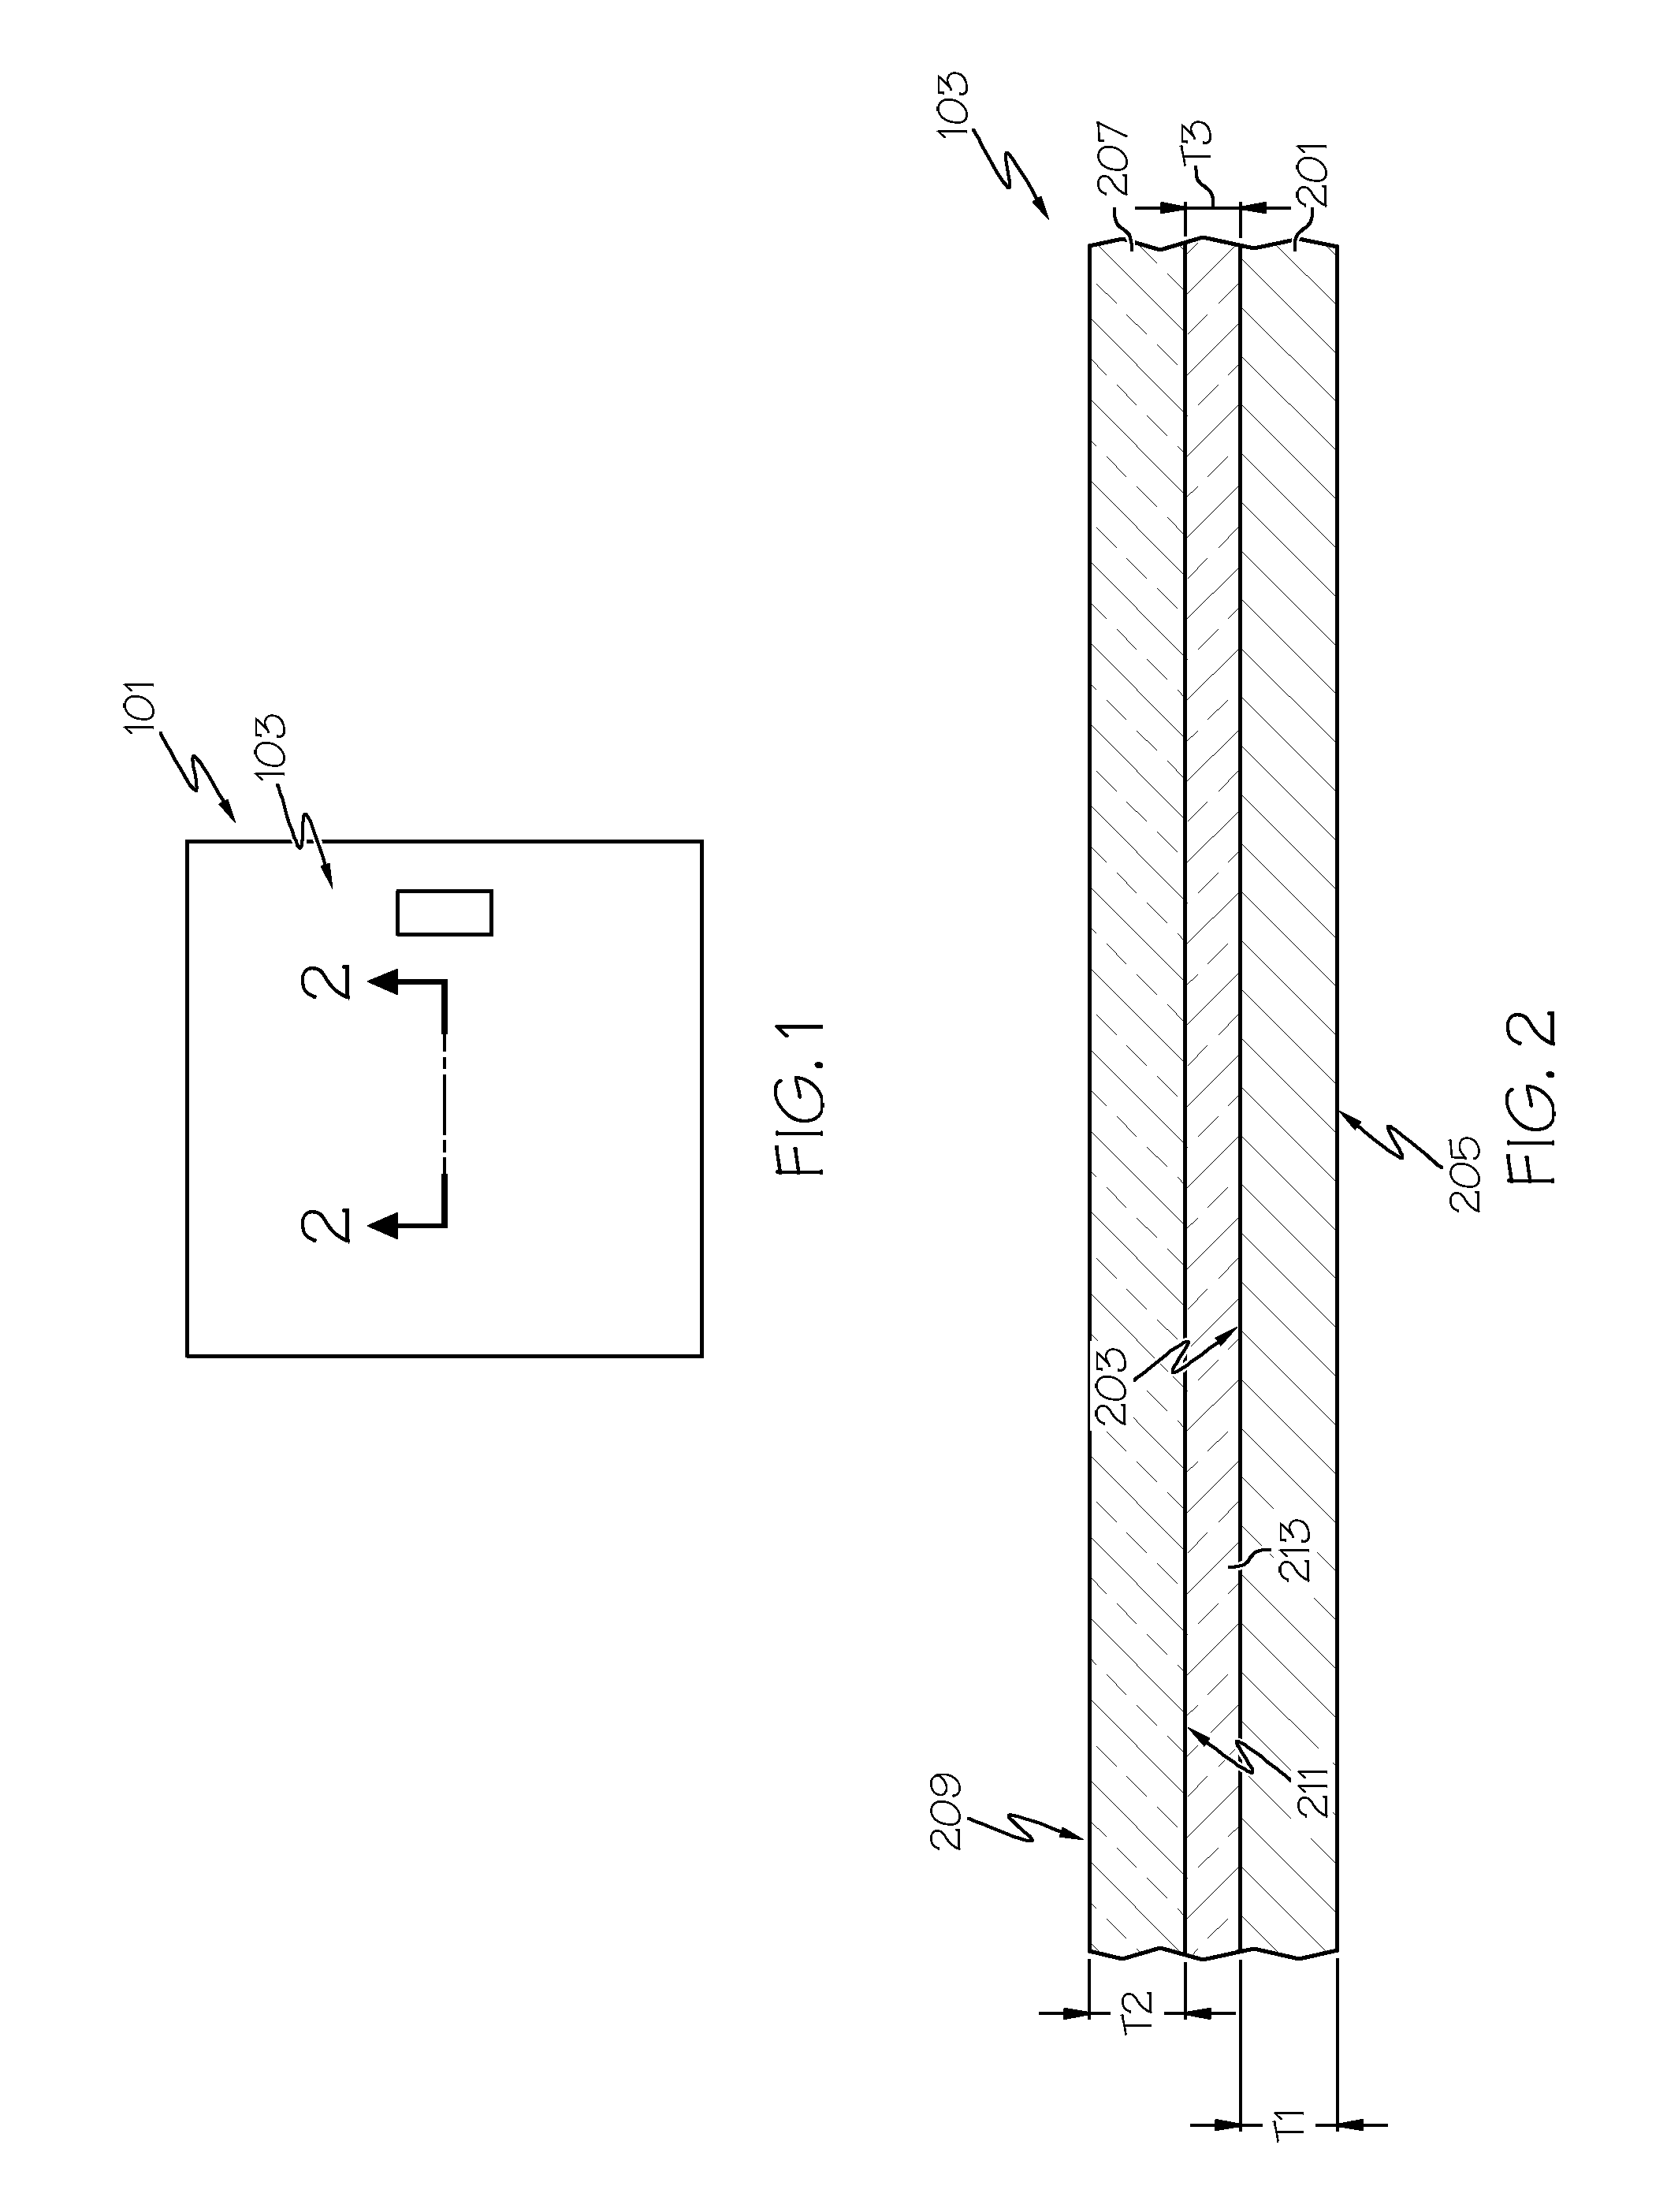 Glass/metal laminated structures and methods of manufacturing laminated structures